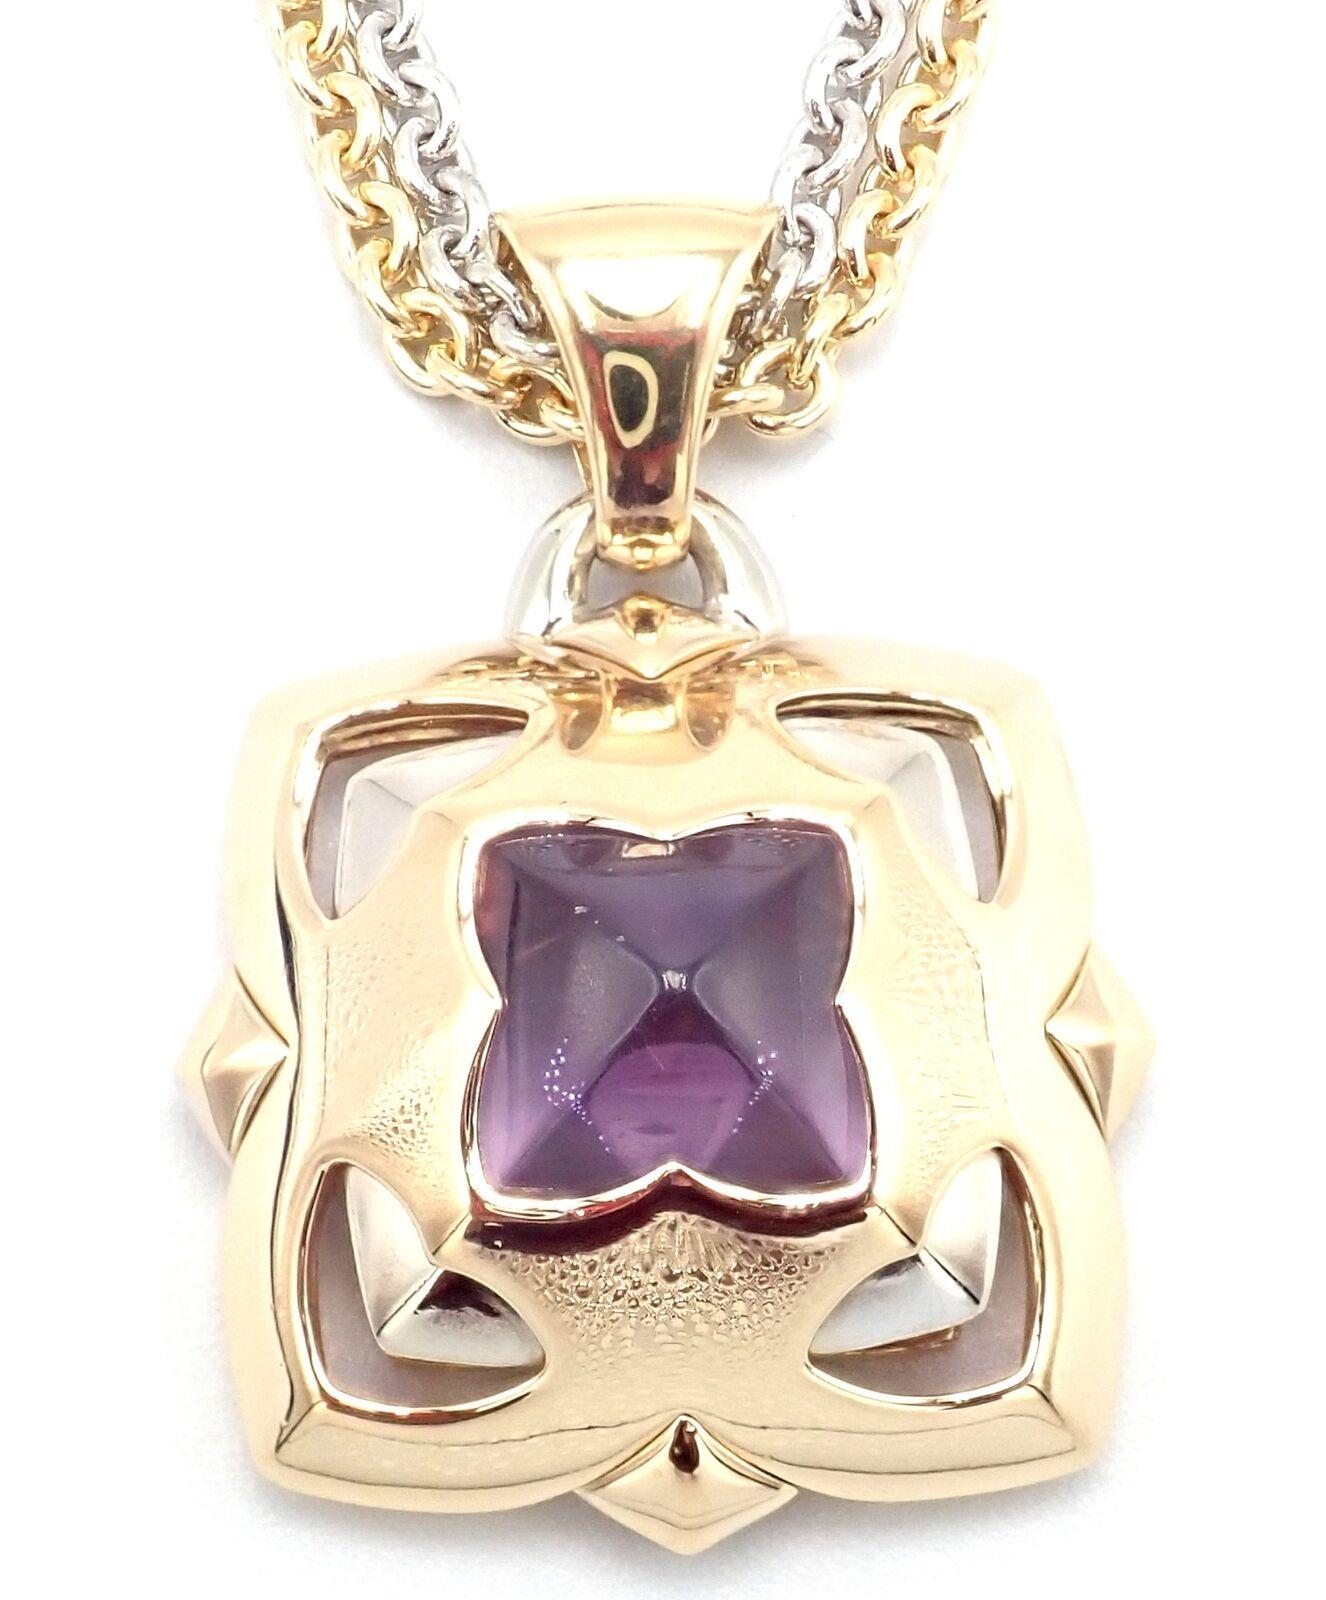 18k yellow gold and white gold large amethyst Pyramid pendant necklace by Bulgari.
With 1 Amethyst 12mm x 12mm
Details:
Chains Length: White Gold 20